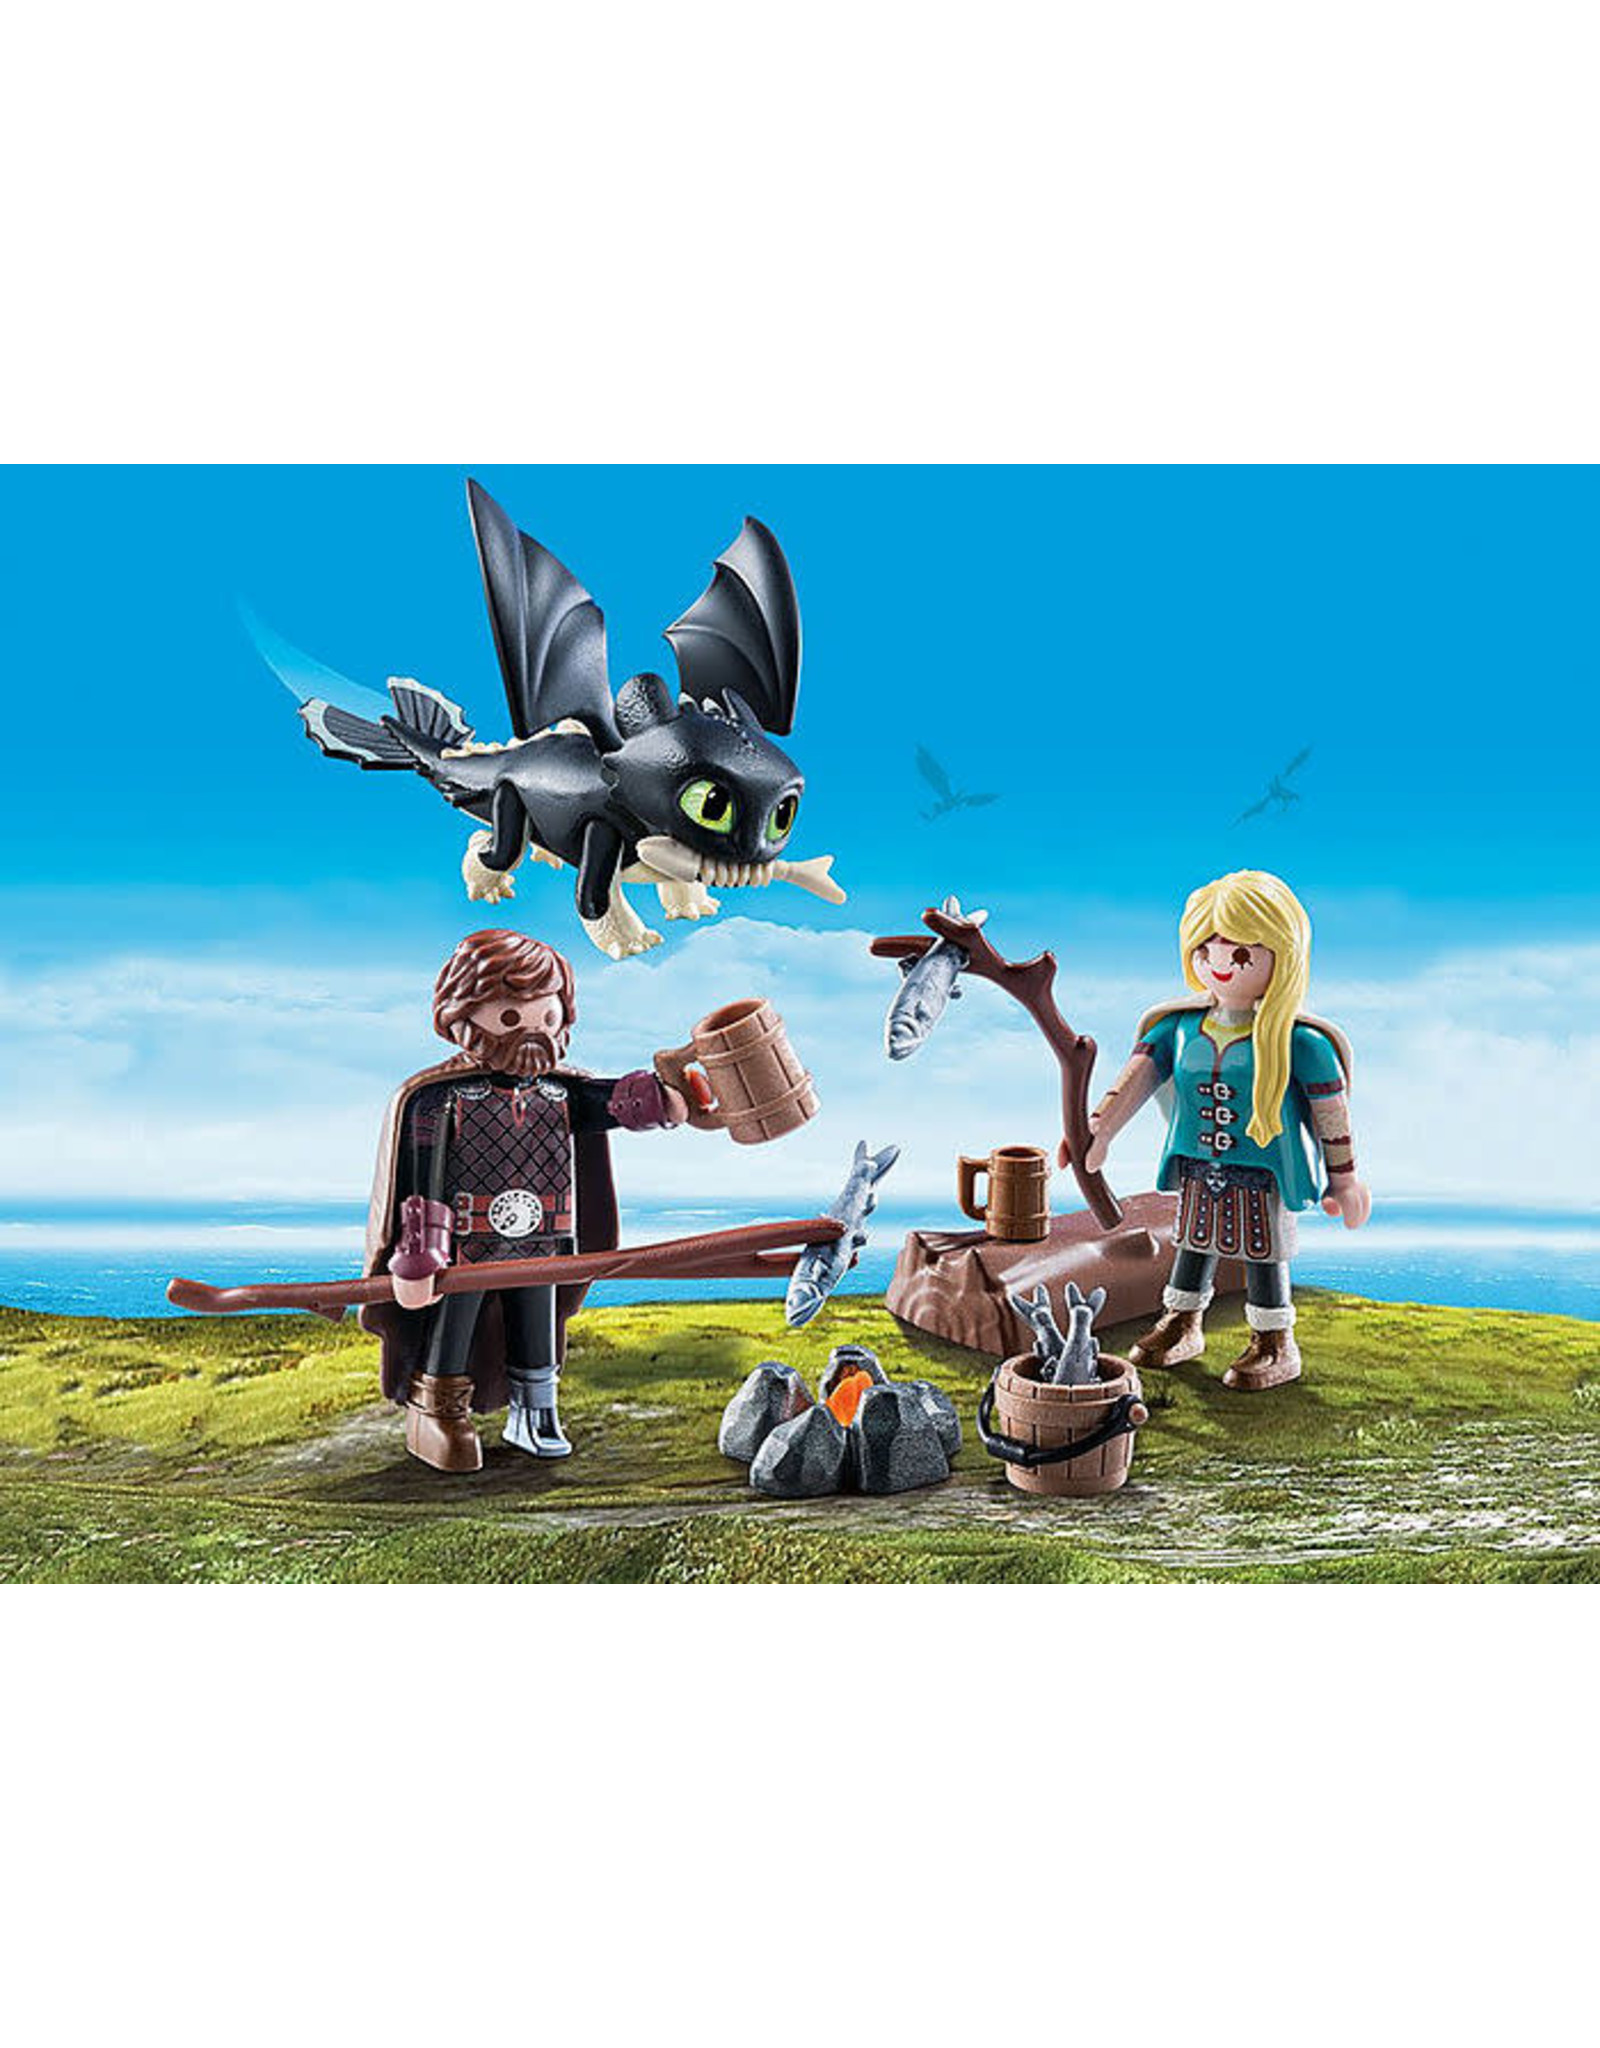 Playmobil Hiccup and Astrid Playset